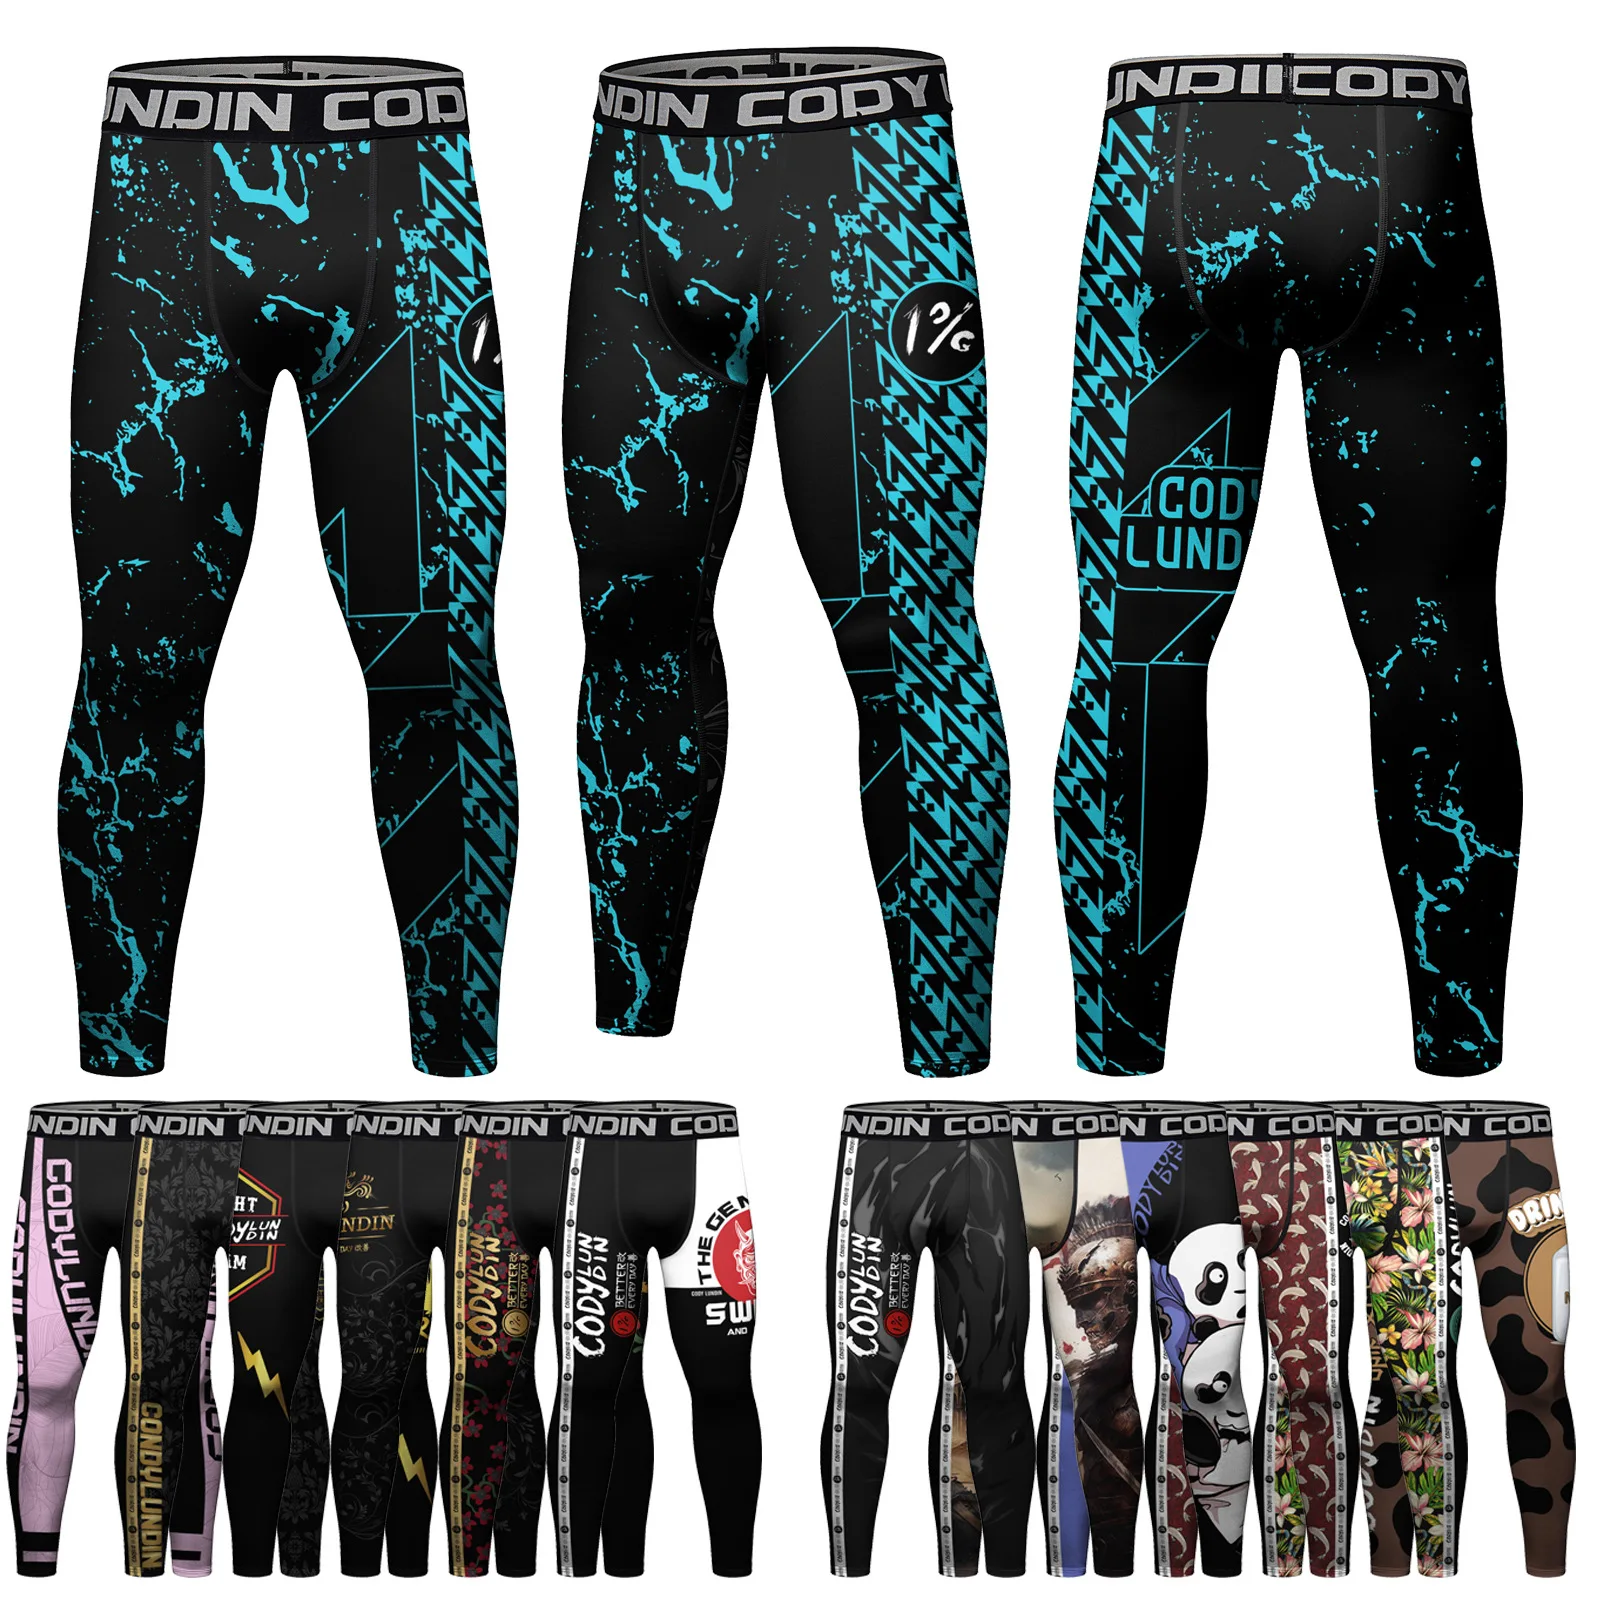 

Men's Sport Compression Pants Gym Running Tights MMA Basketball Leggings Quick Dry Fit Jogging Training Fitness Workout Trousers